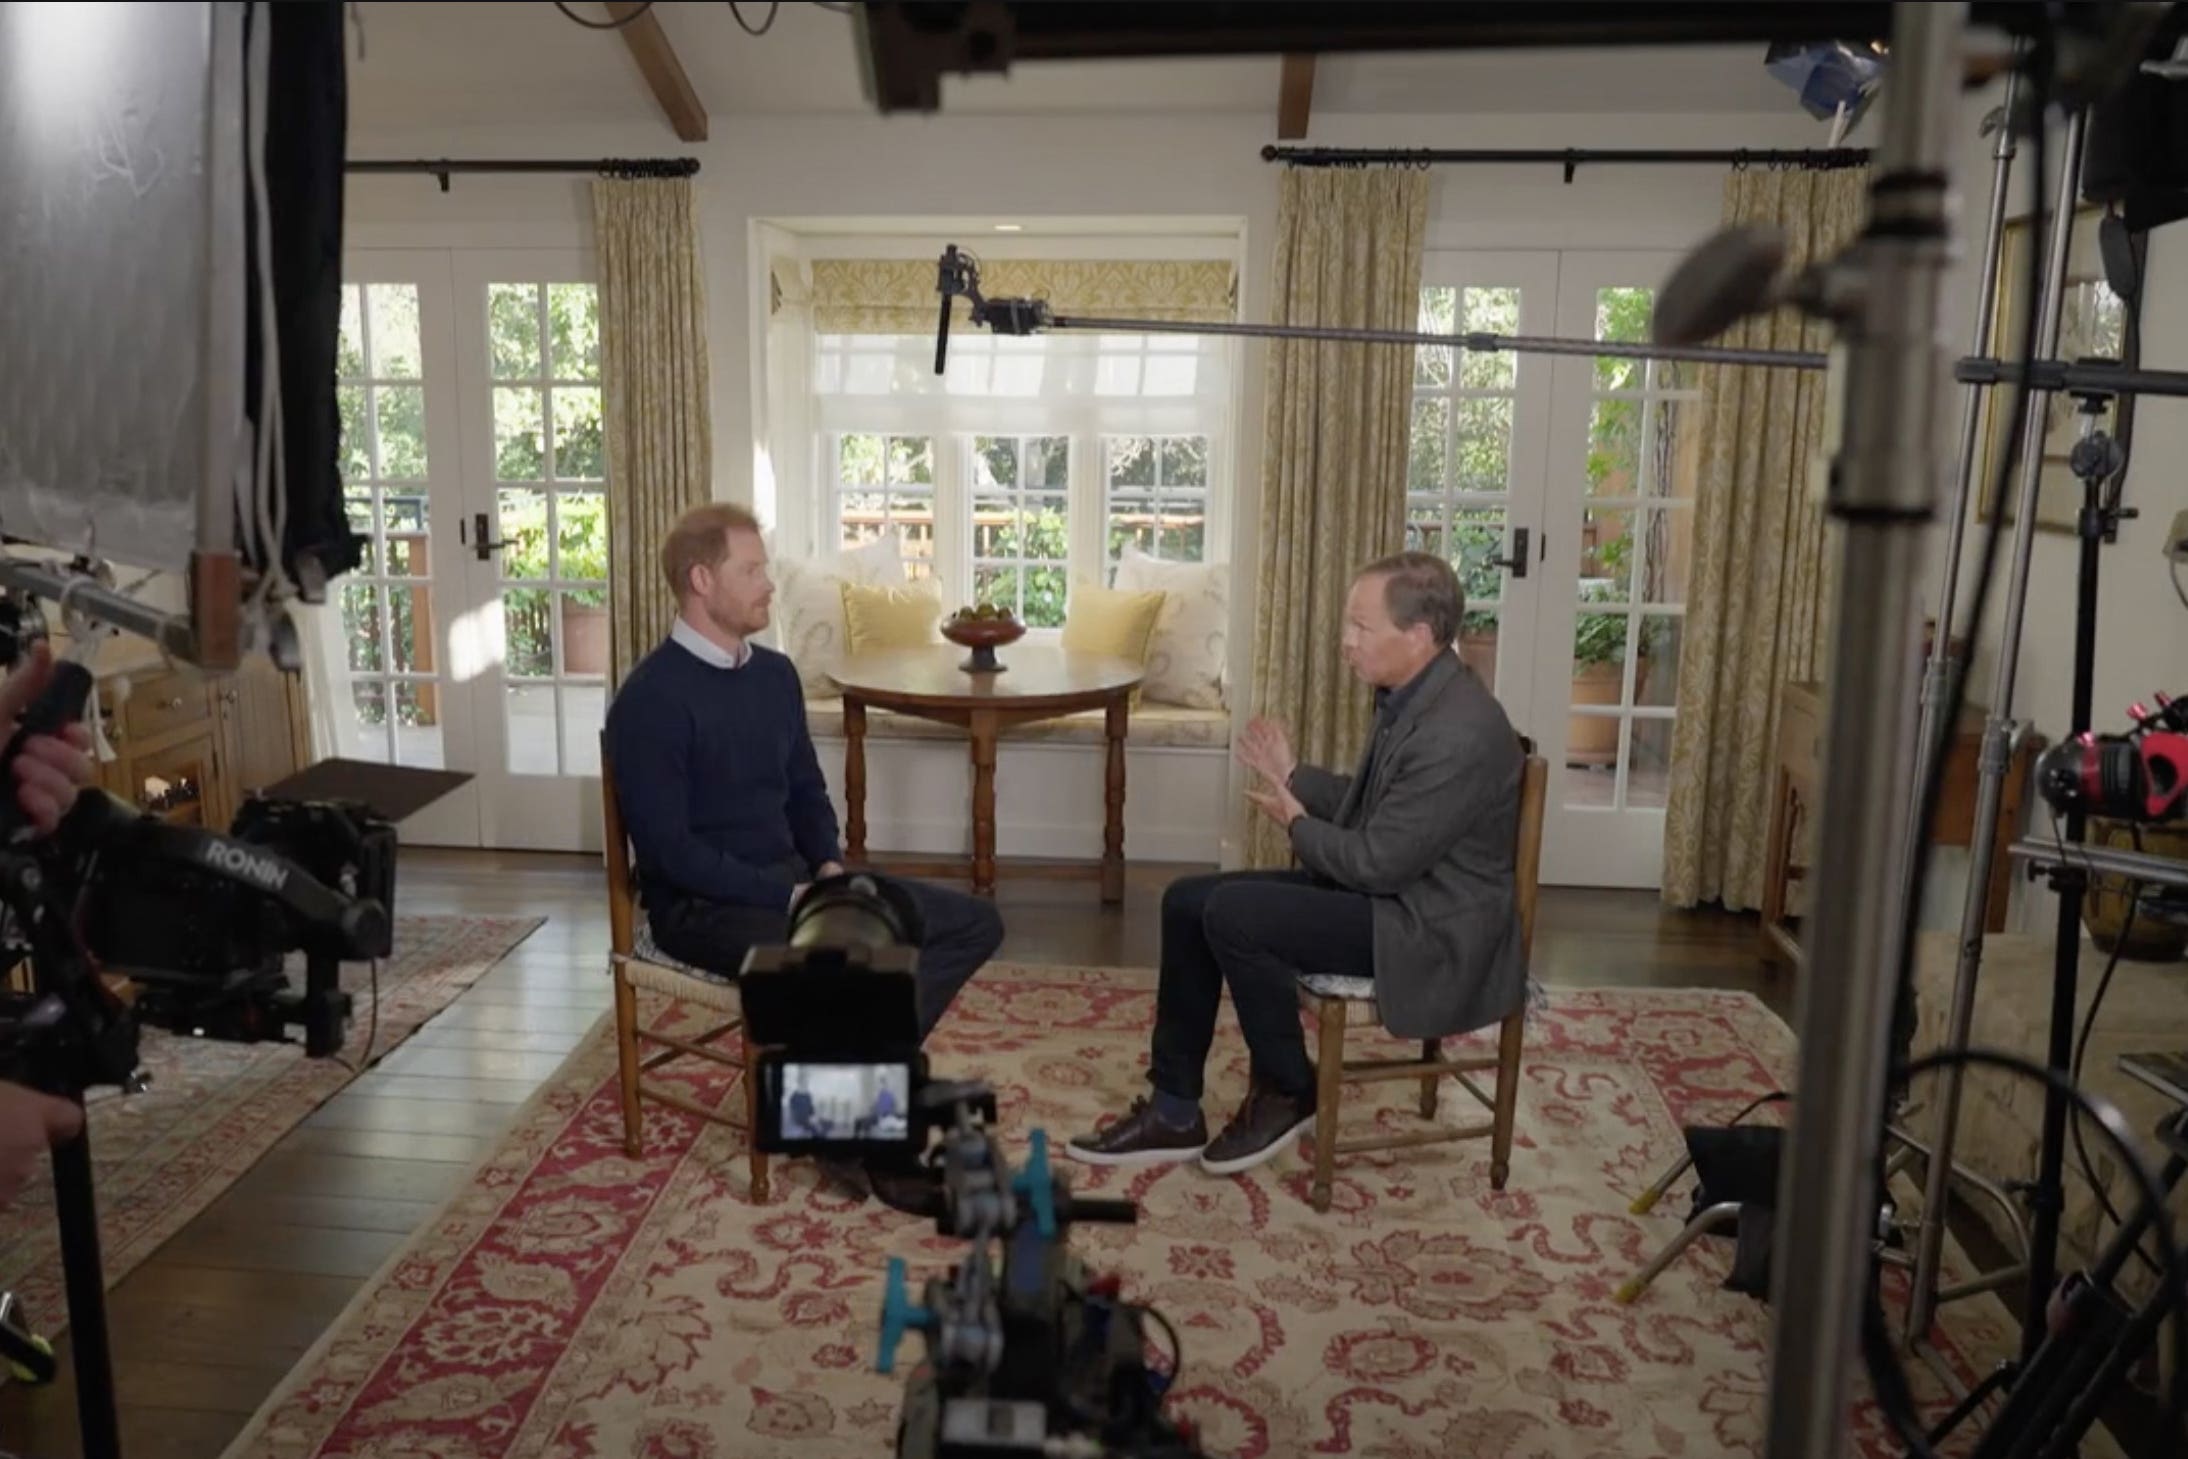 The Duke of Sussex during an interview with ITV’s Tom Bradby in California